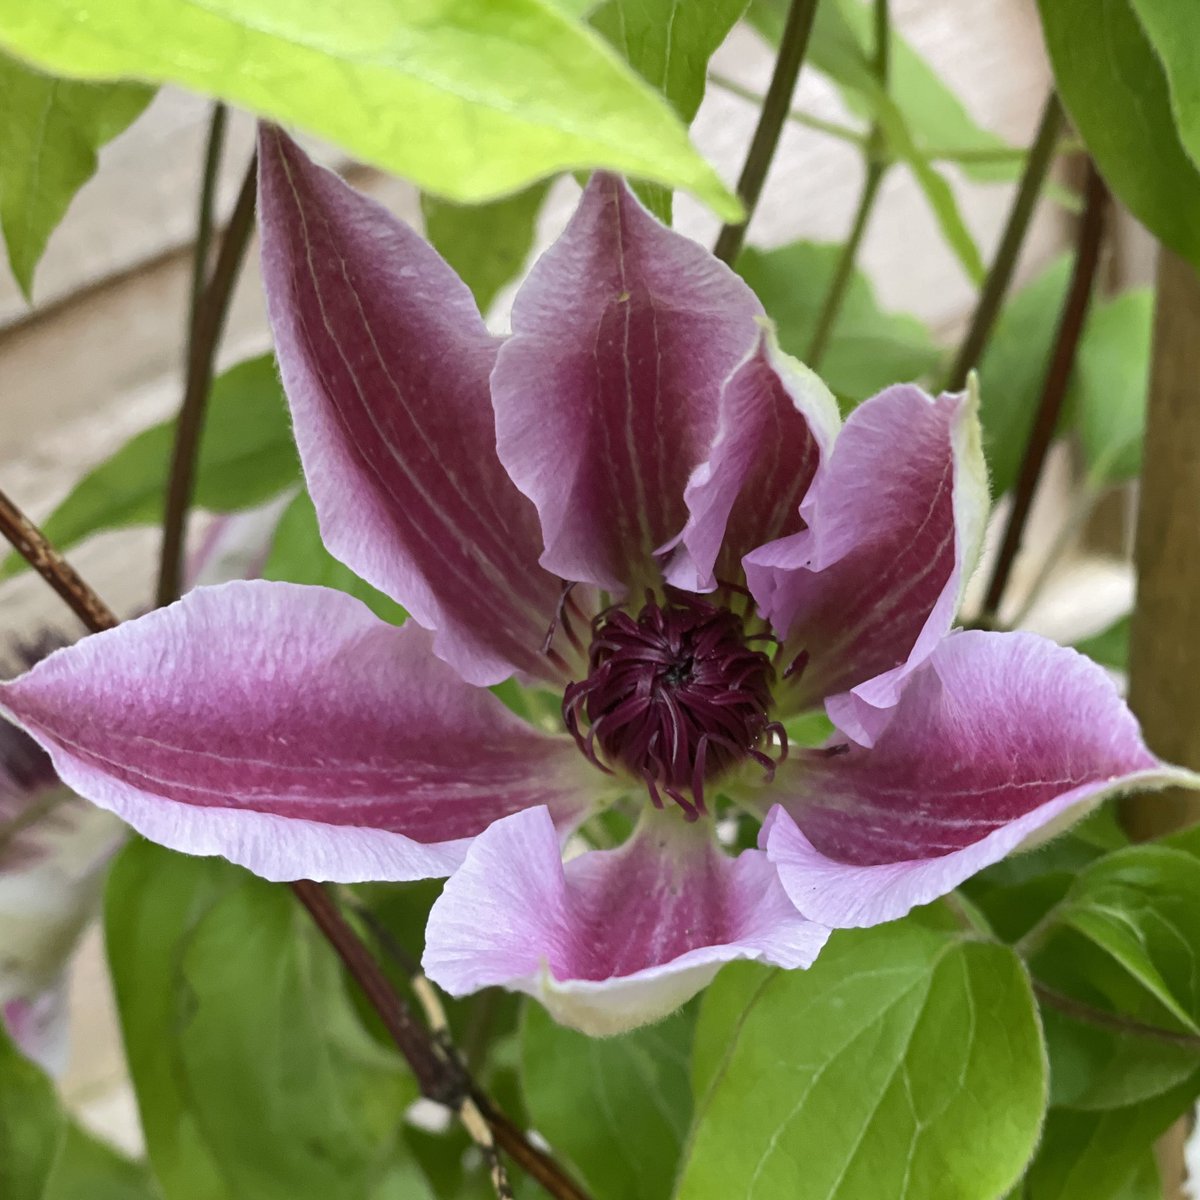 Clematis ‘Nelly Moser' is in my Devon garden yesterday The flowers keep their colour best in the shade. #clematisthursday #Flowers